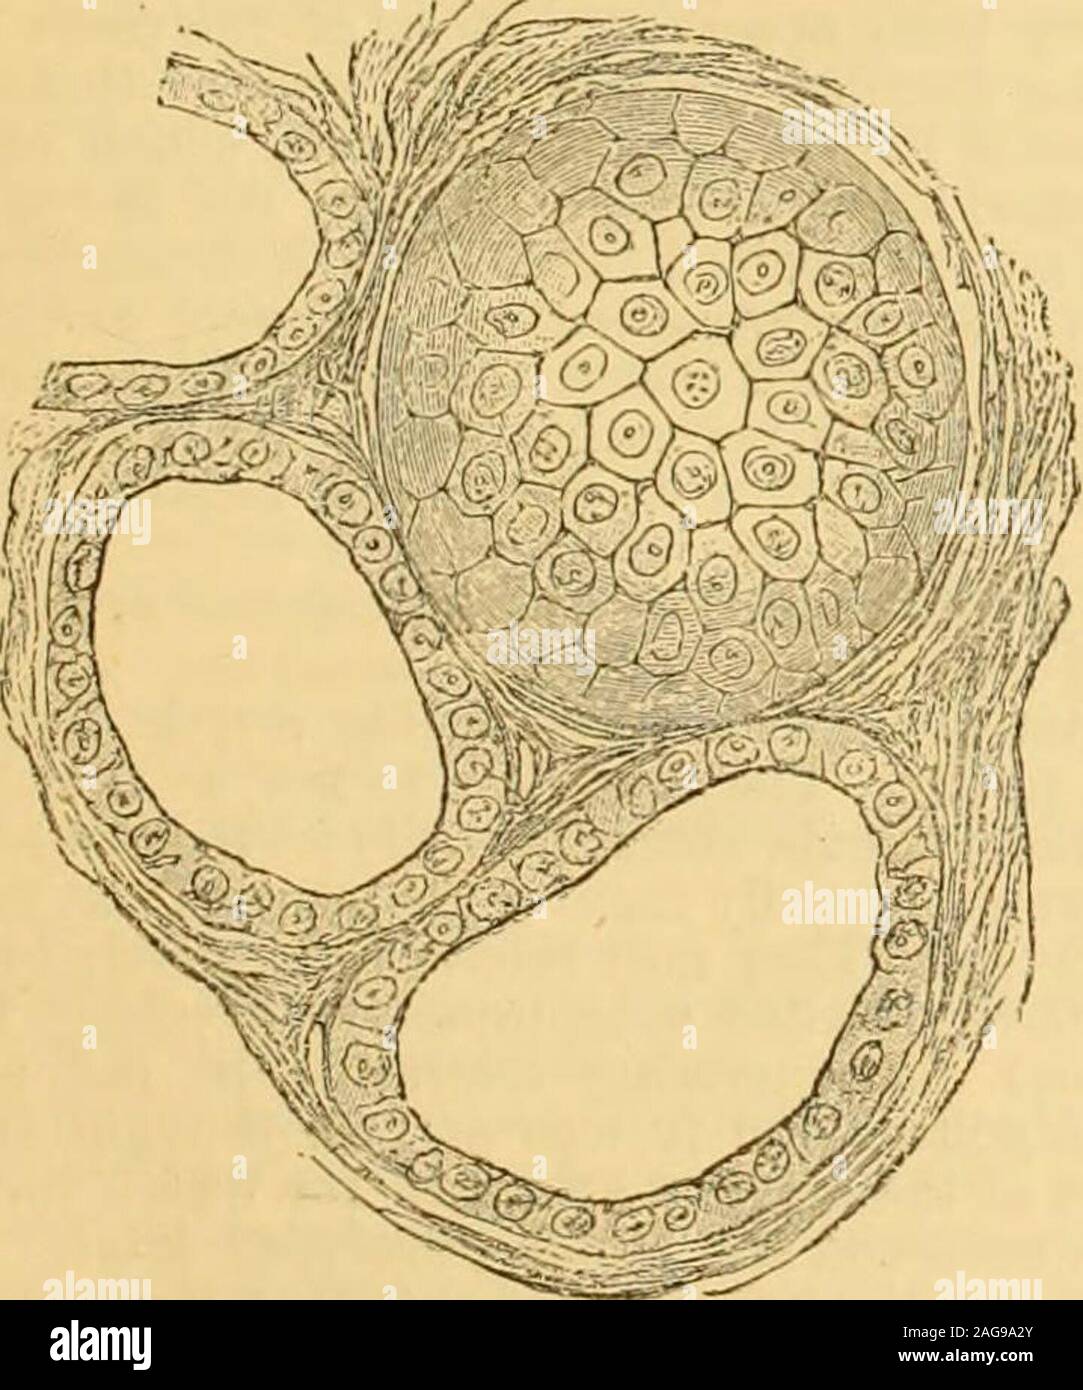 . A Reference handbook of the medical sciences : embracing the entire range of scientific and practical medicine and allied science. with colloid sub-stance similar to thatfound within the vesicles.Wolfler has describedthe gland as consisting ofa cortical portion in whichthe development is incom-plete, the epithelial cellsbeing arranged in solidelongated clusters or col-umns, and a medullaryportion where the glandis fully developed, and allthe cells are arranged toform vesicles. The exist-ence of a limited numberof epithelial columns inthe medullary part of thegland, regarded by Vir-chow as ev Stock Photo